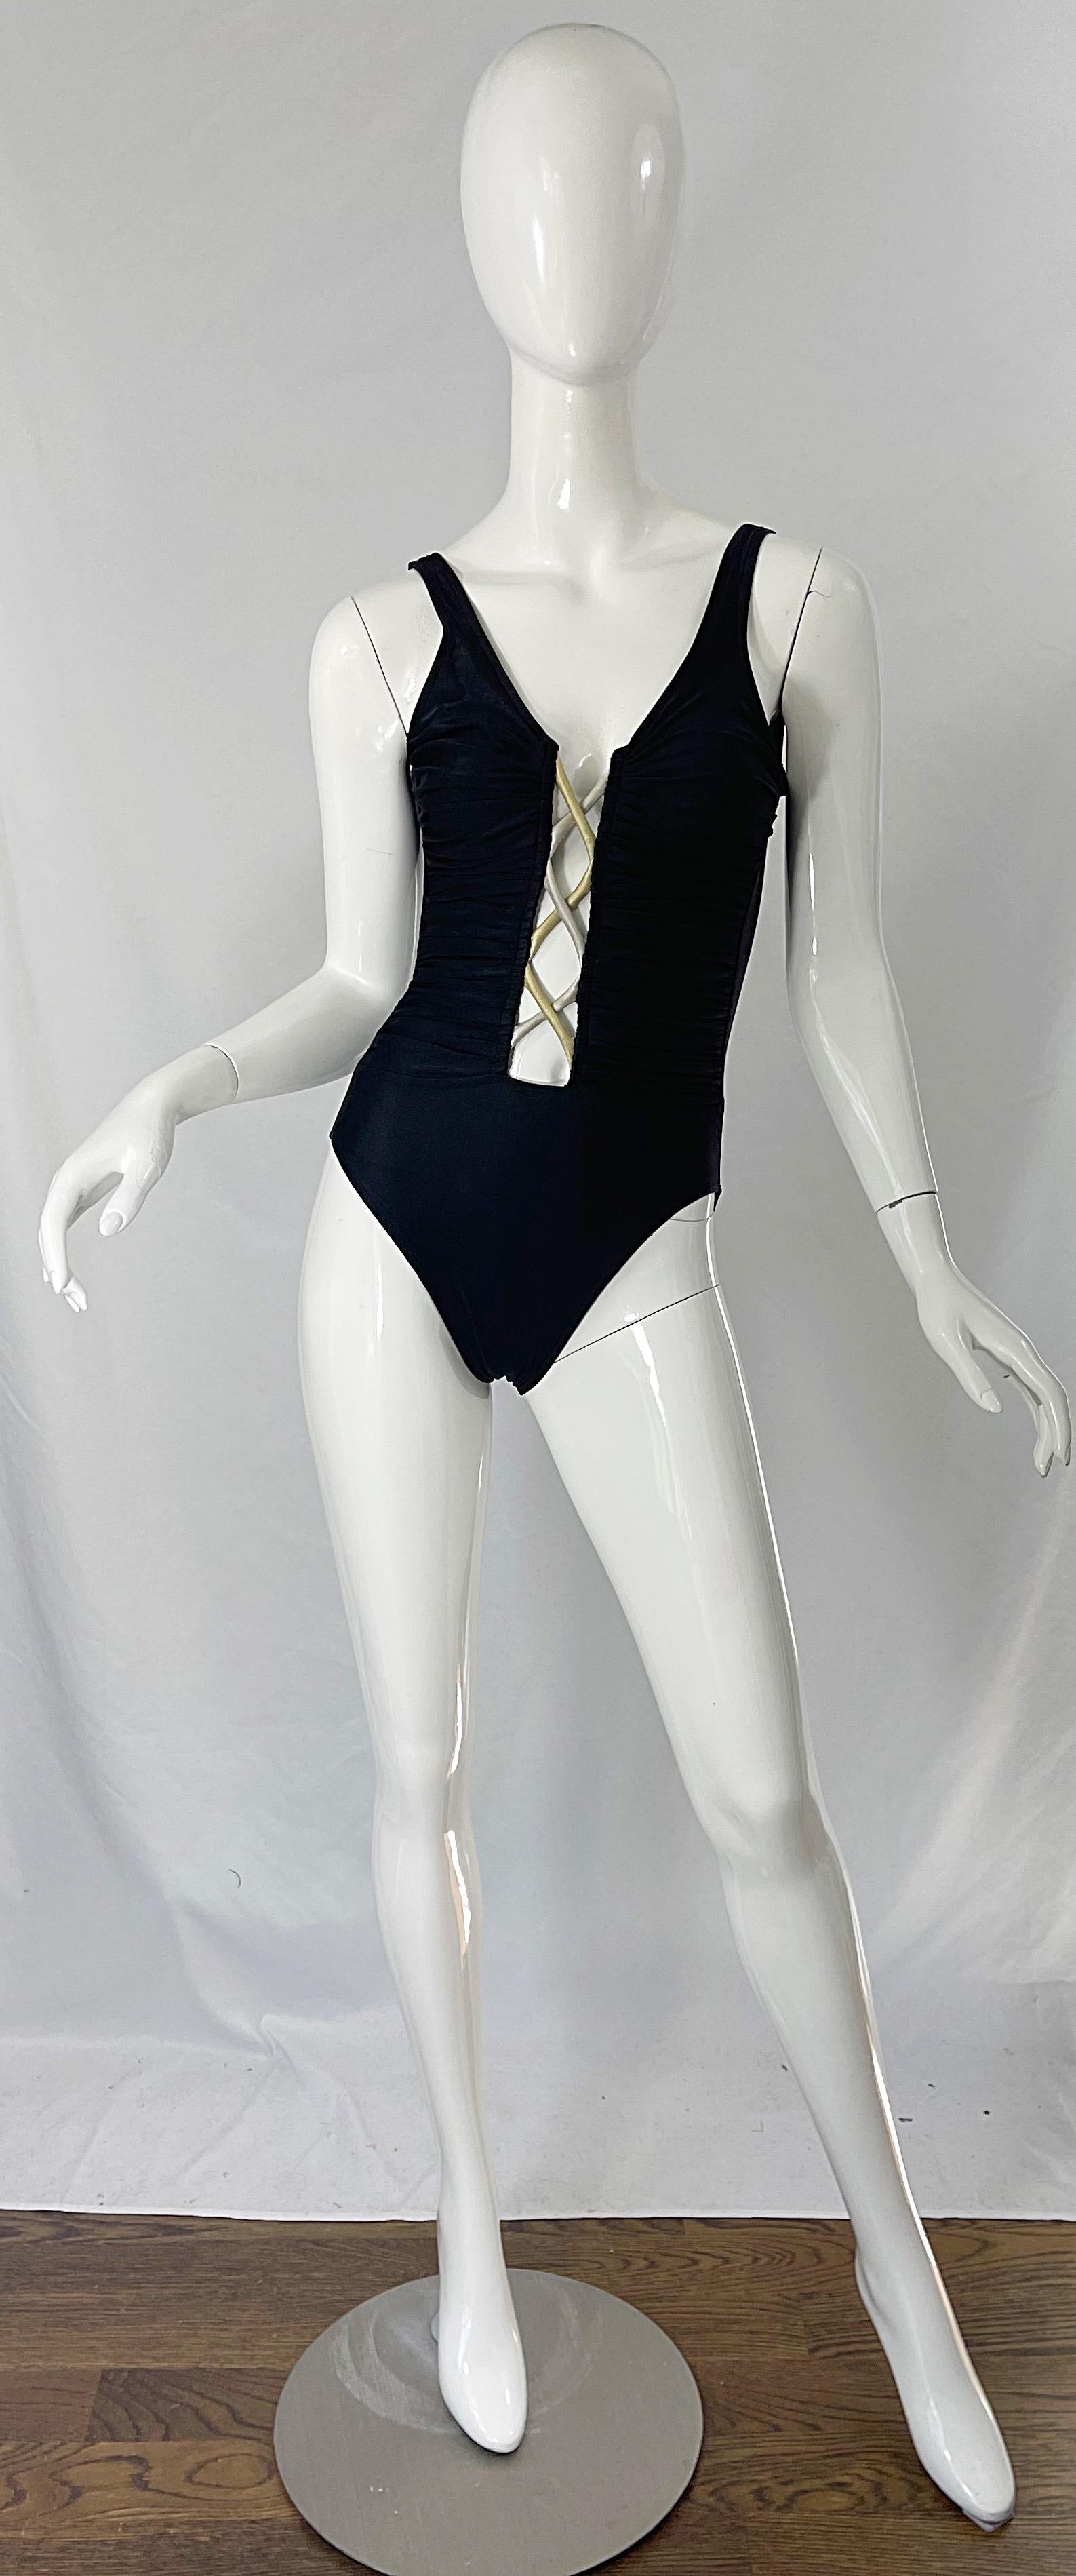 Sexy early 90s BILL BLASS one piece Grecian style swimsuit or bodysuit ! Features a metallic gold and silver rope cut-out detail ( one side light gold, the other silver ) down the front center. Reveals just the right amount of skin. Perfect for the